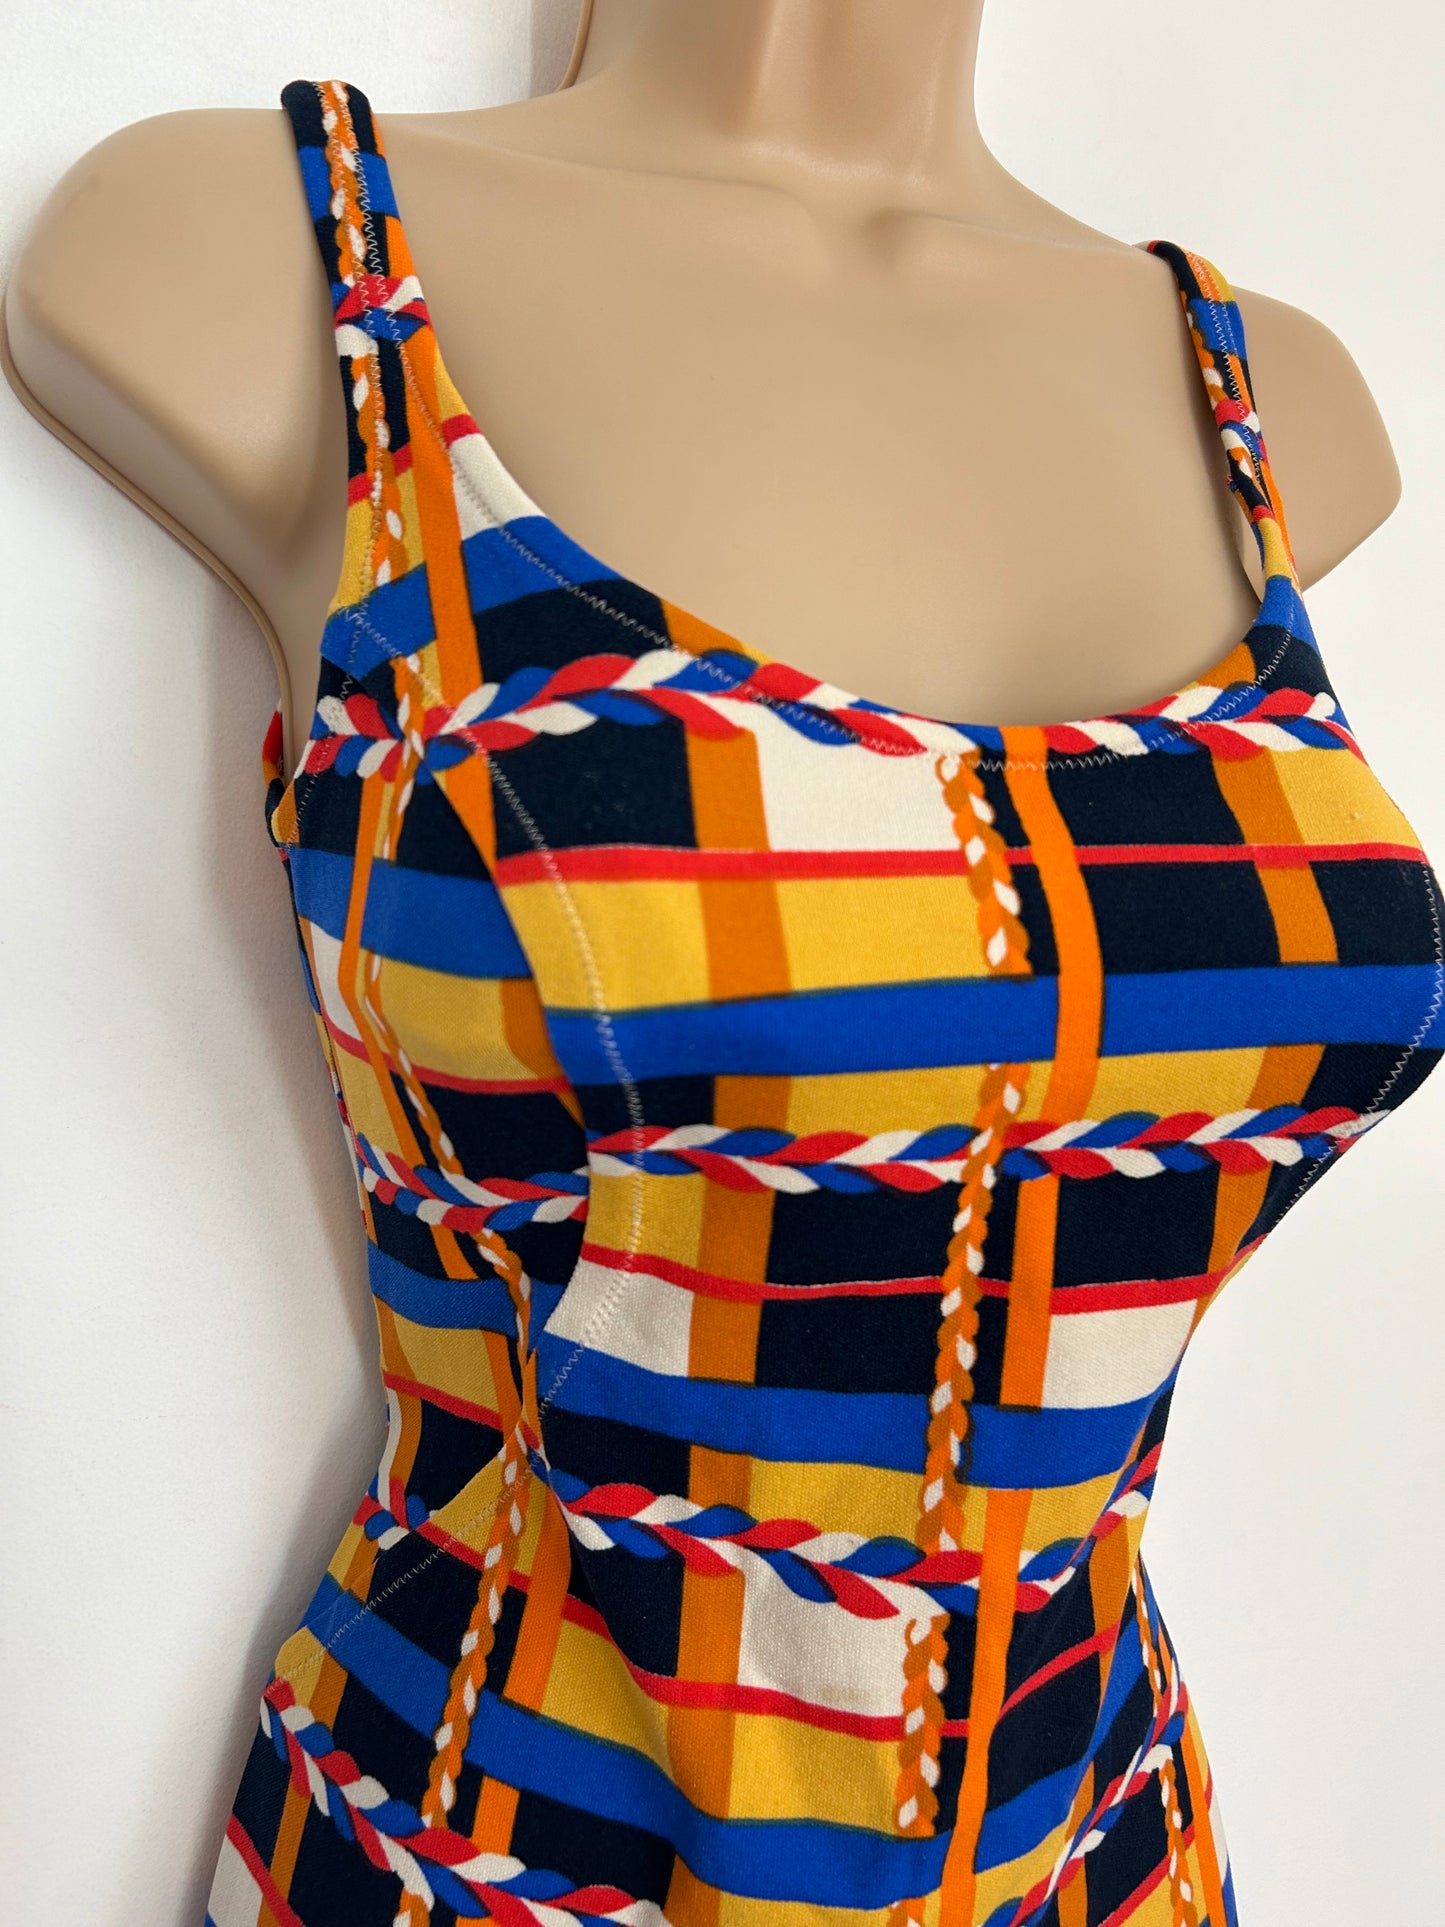 Vintage Late 1960s/Early 1970s FRIOLA UK Approx Size 12 Orange Blue Yellow & Black Check & Plait Print Swimsuit Bathing Costume